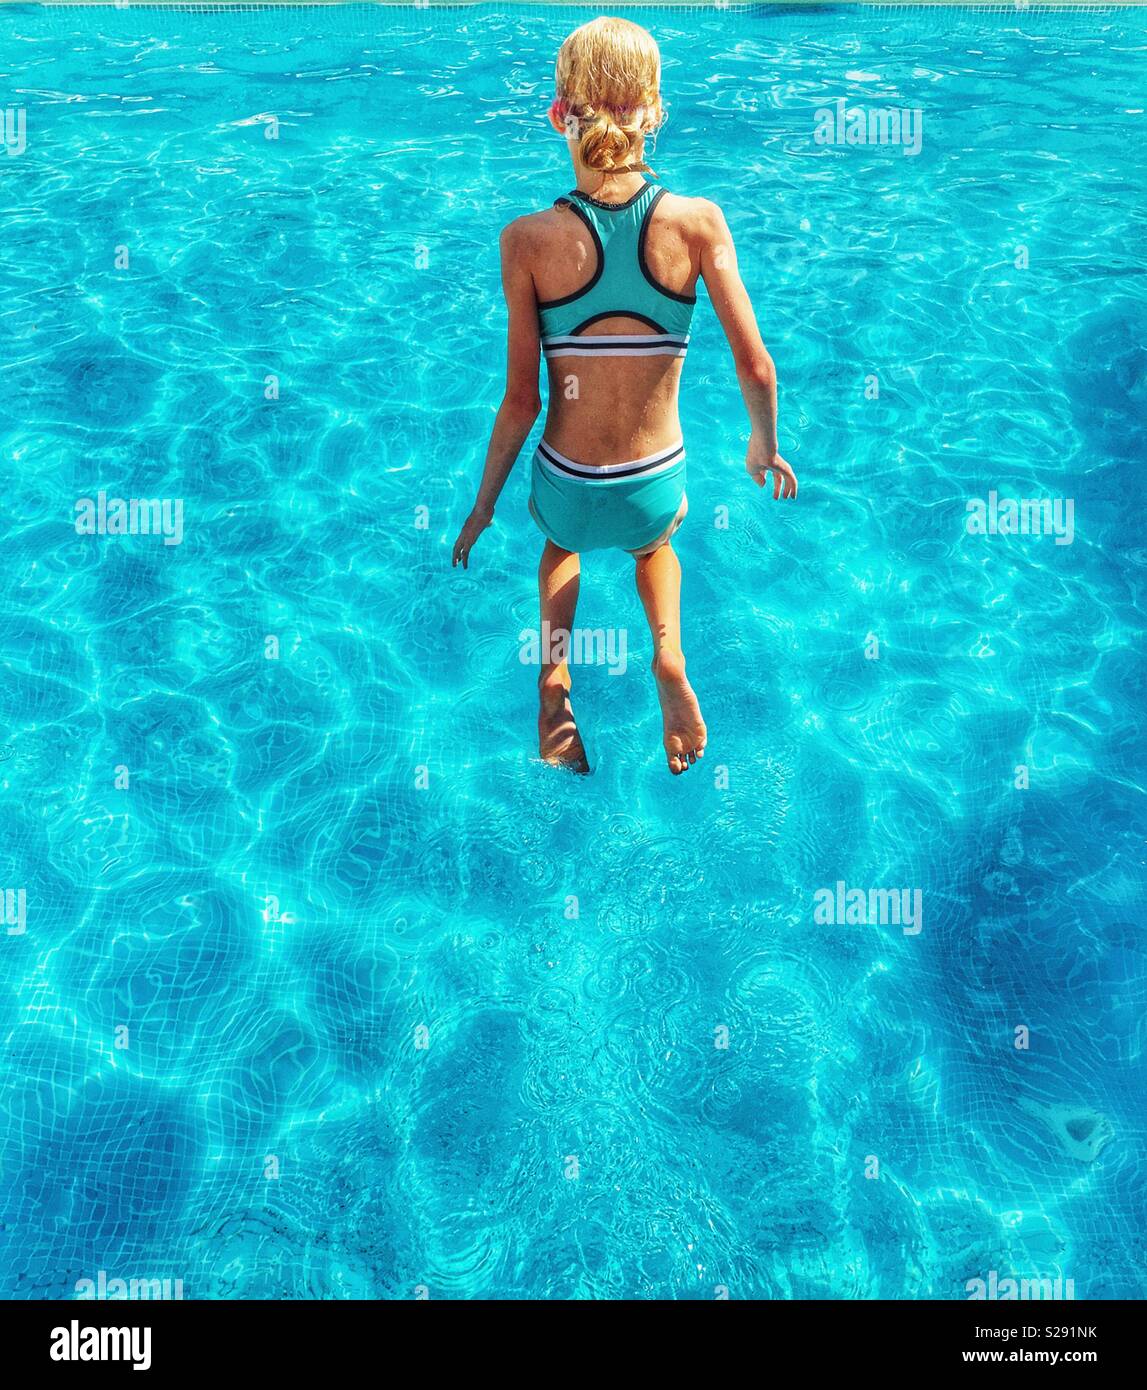 Young girl in blue swimming costume jumping into blue pool Stock Photo